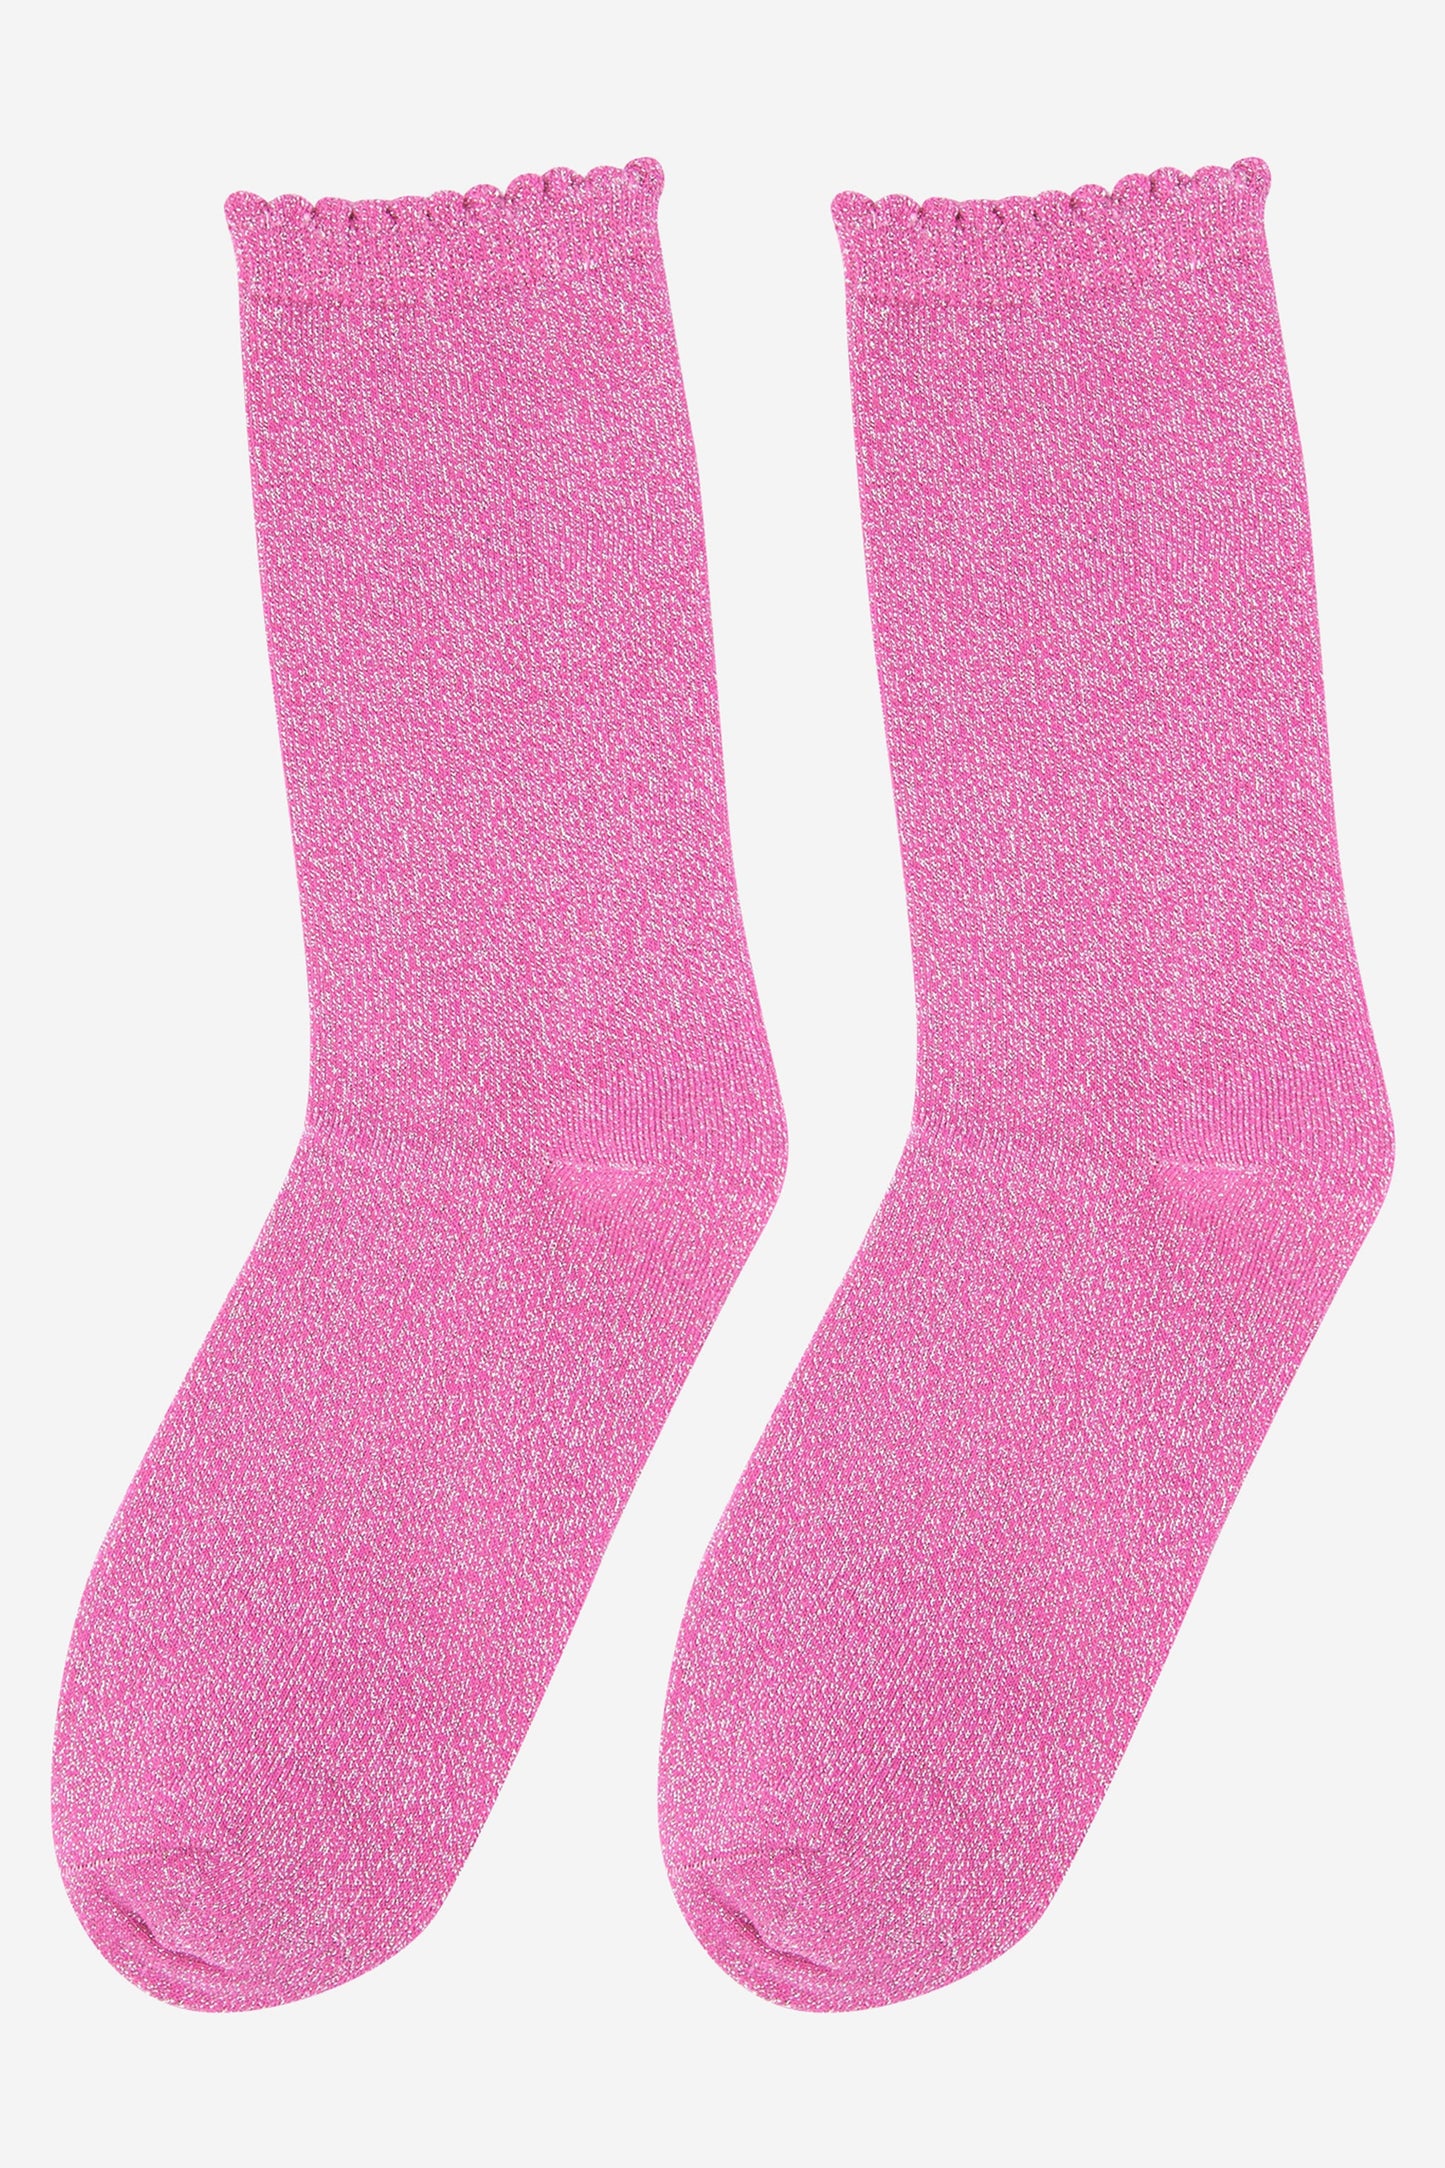 pink sparkly glitter socks with scalloped cuffs and an all over shimmer